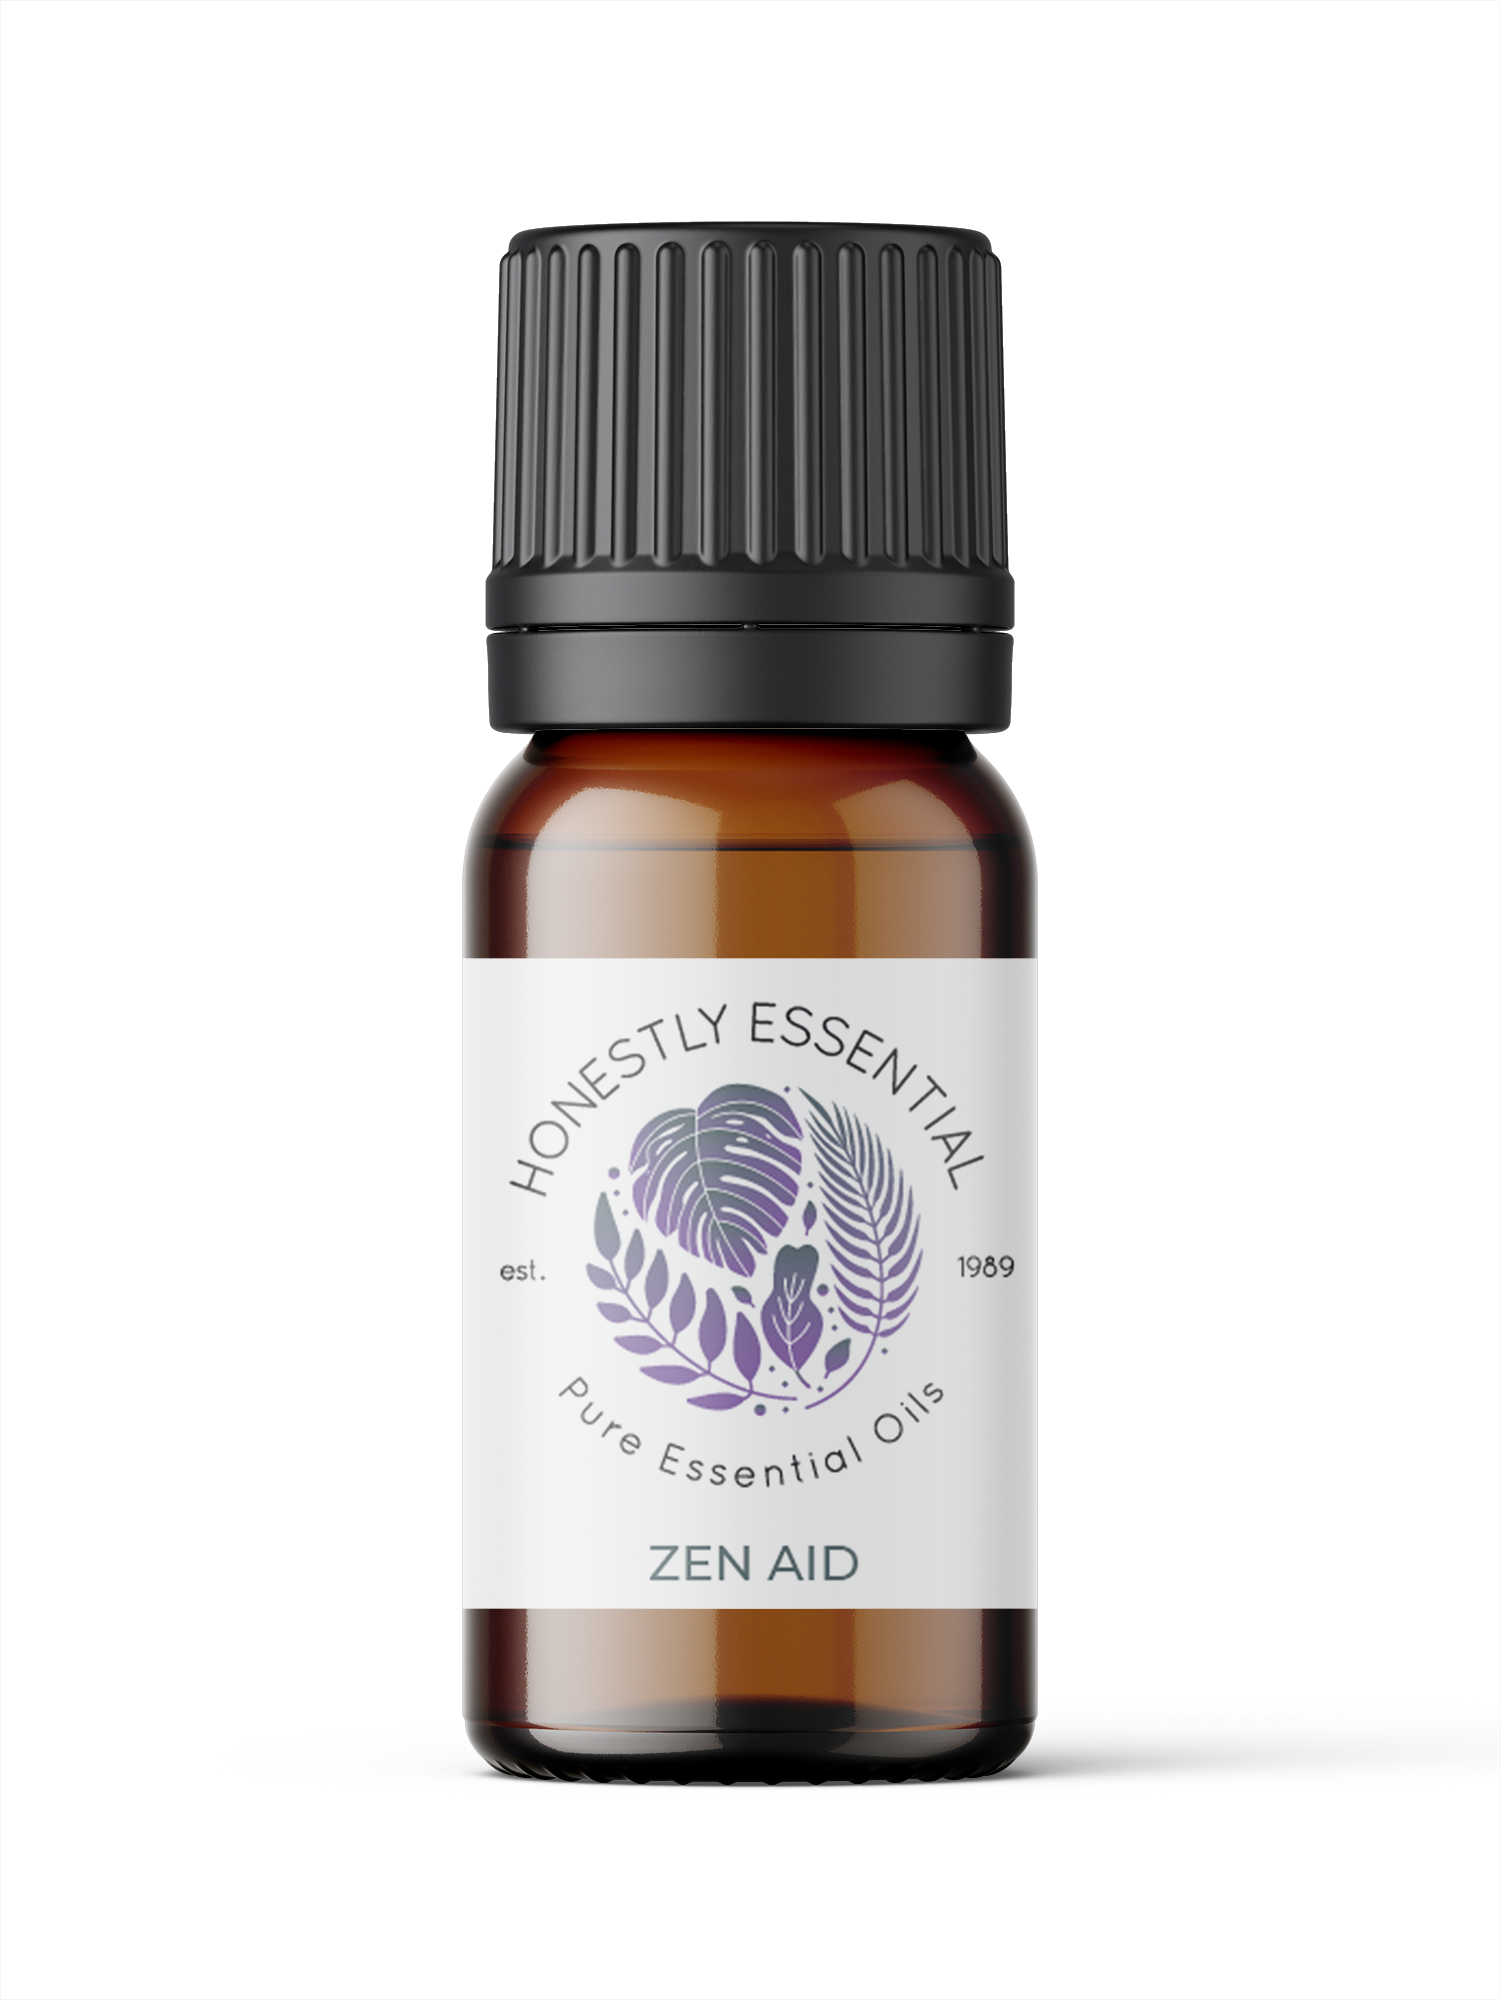 Zen Aid Synergistic Blend - Synergistic Blends | Honestly Essential Oils synergistic